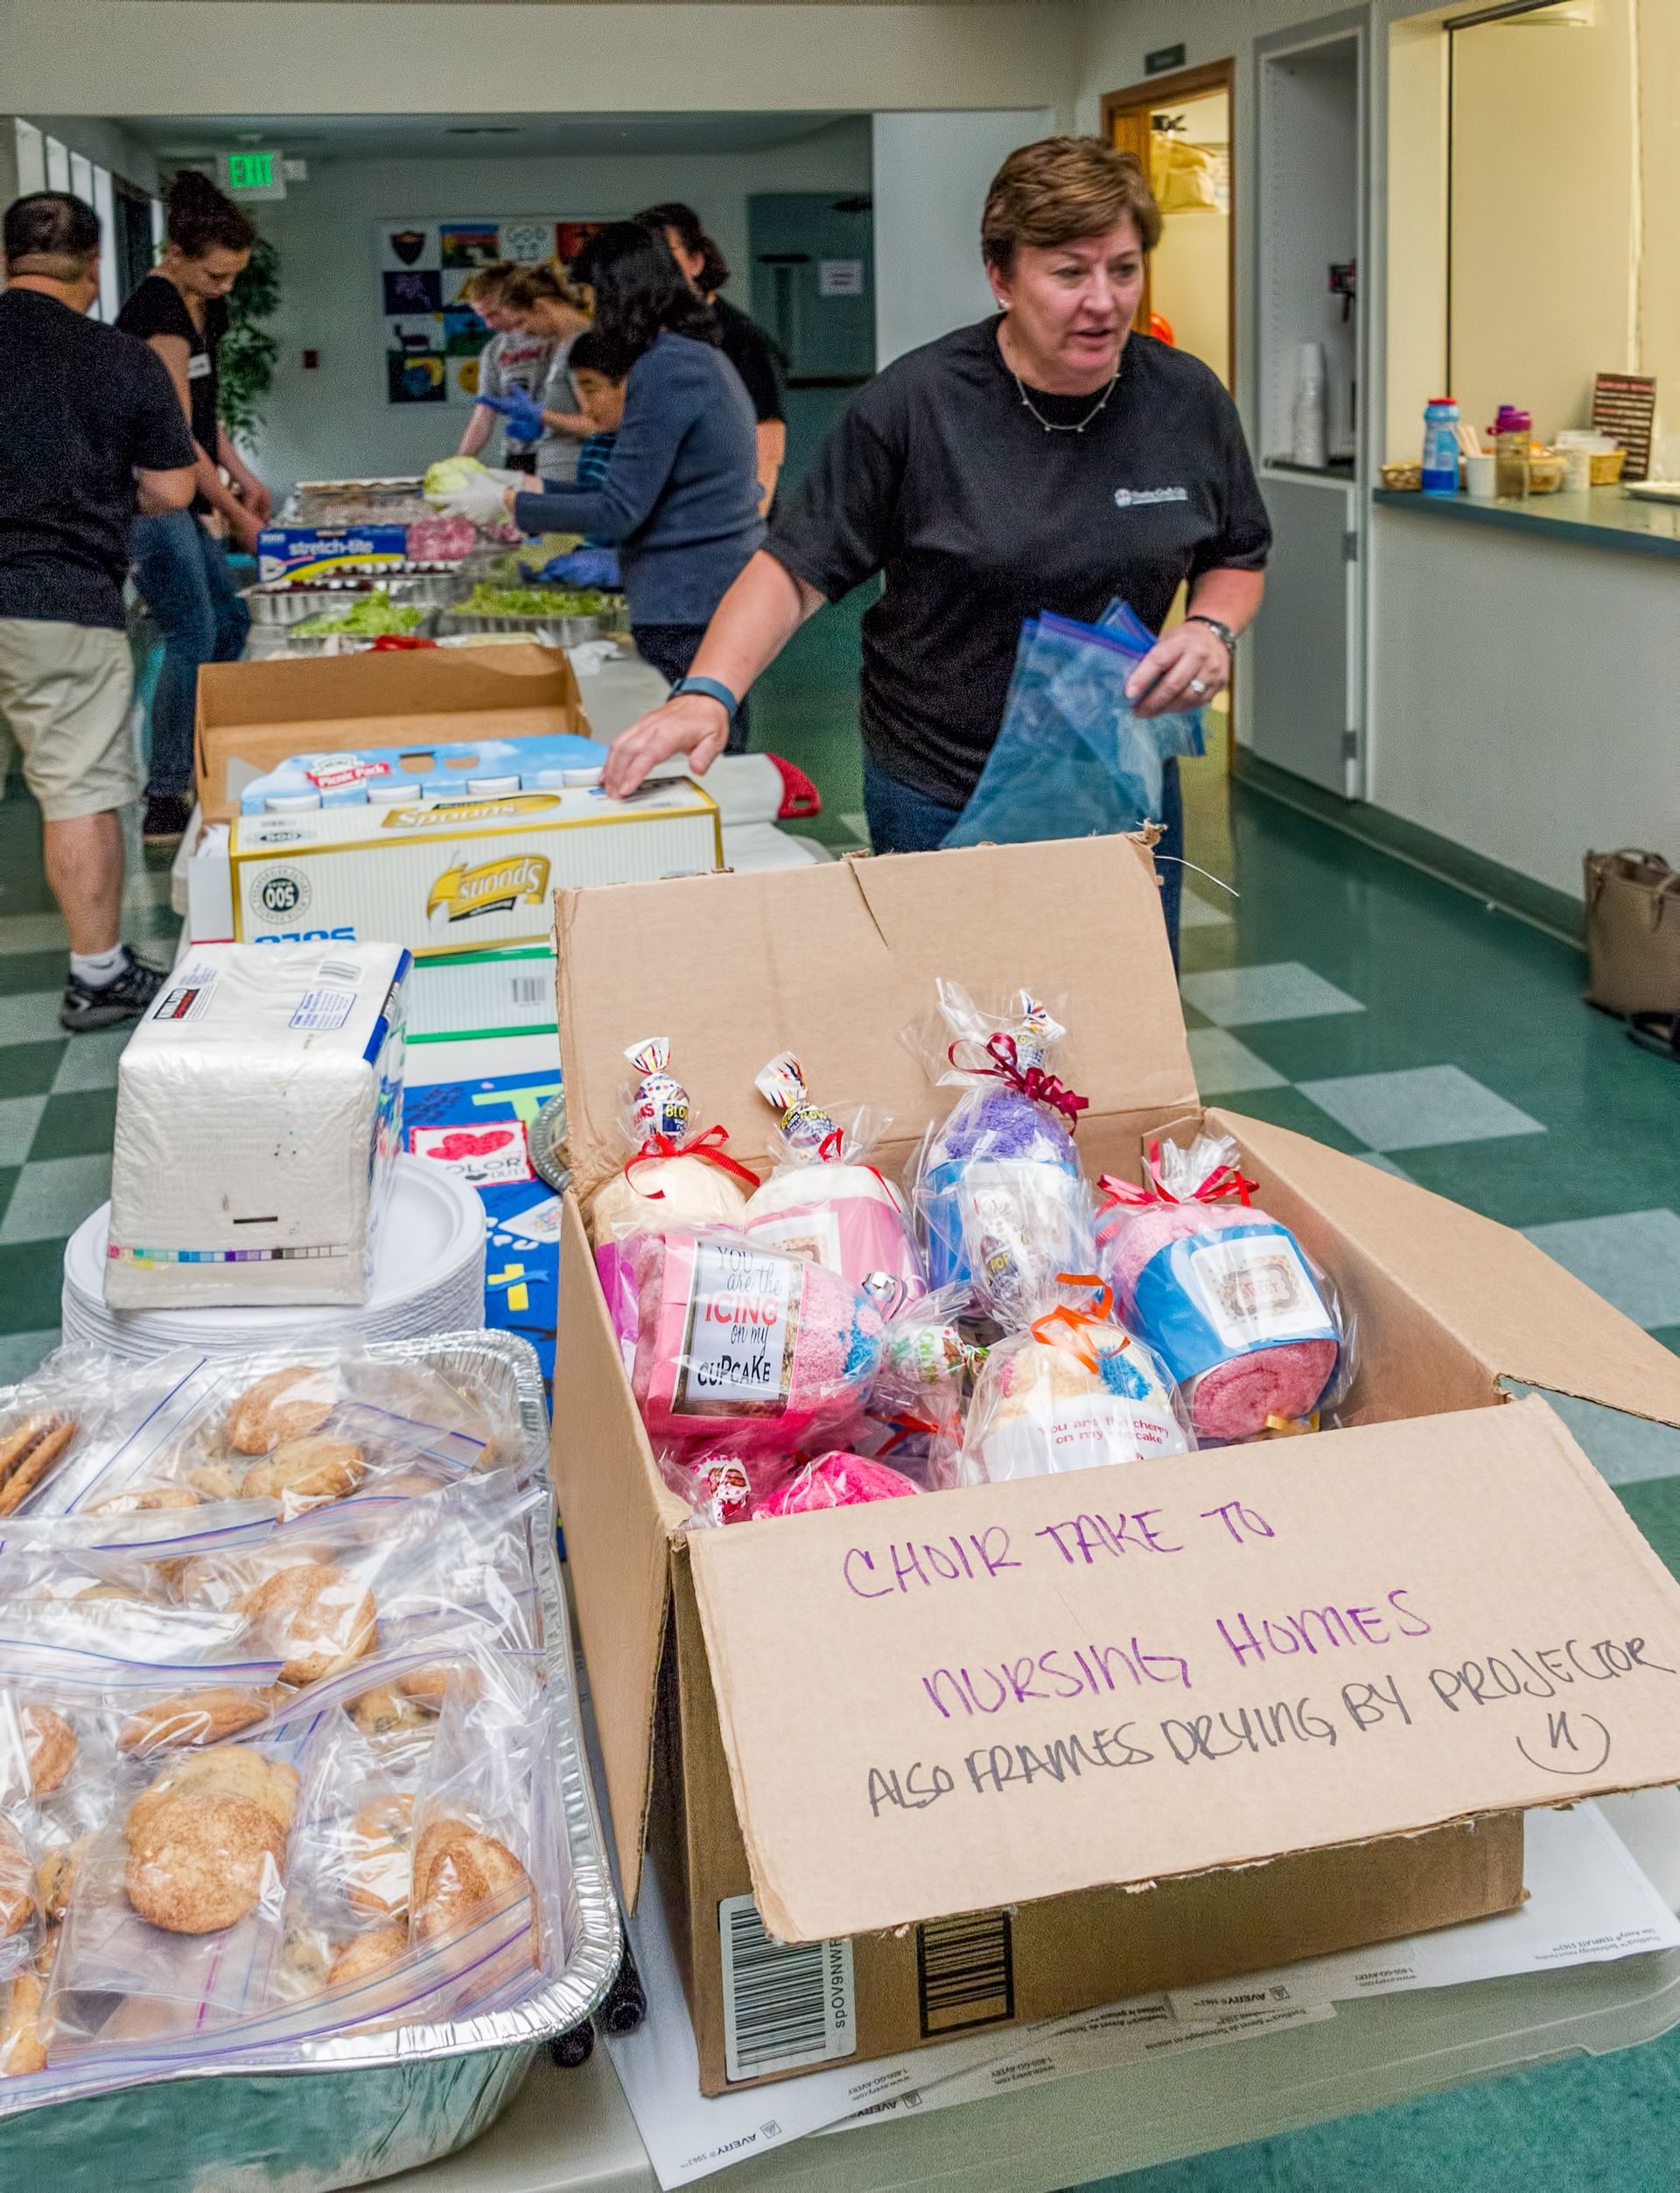 A group of volunteers assembling food at a nursing home.